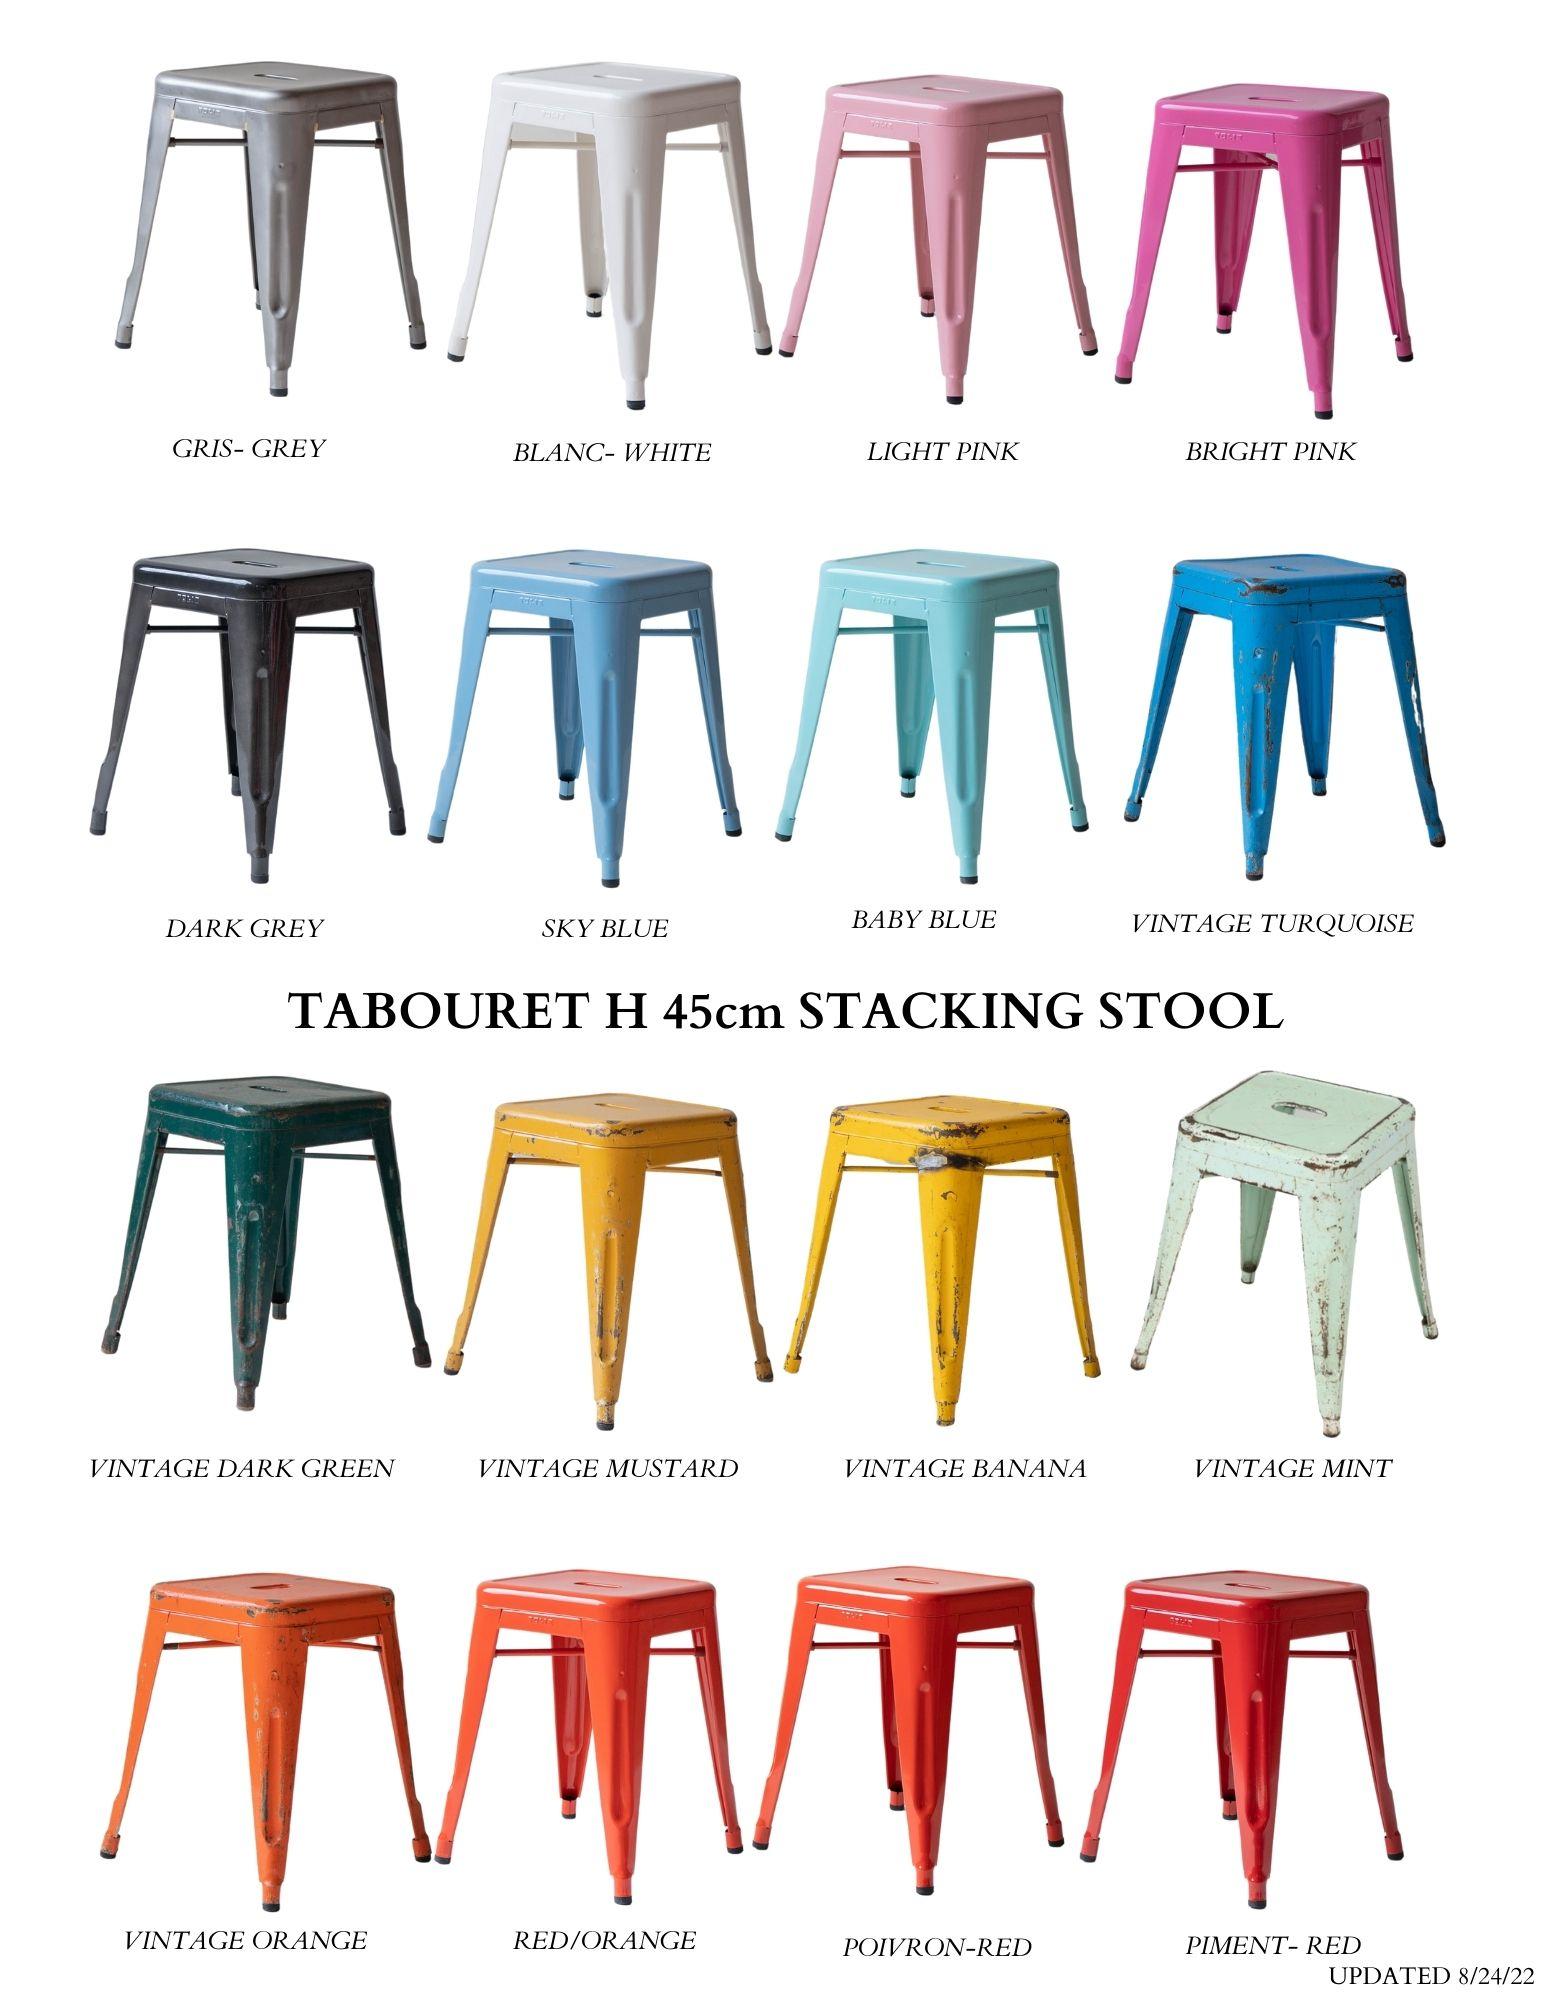 Tolix Made in France Steel Stacking Stools 100's in Stock, Most Colors Available For Sale 2